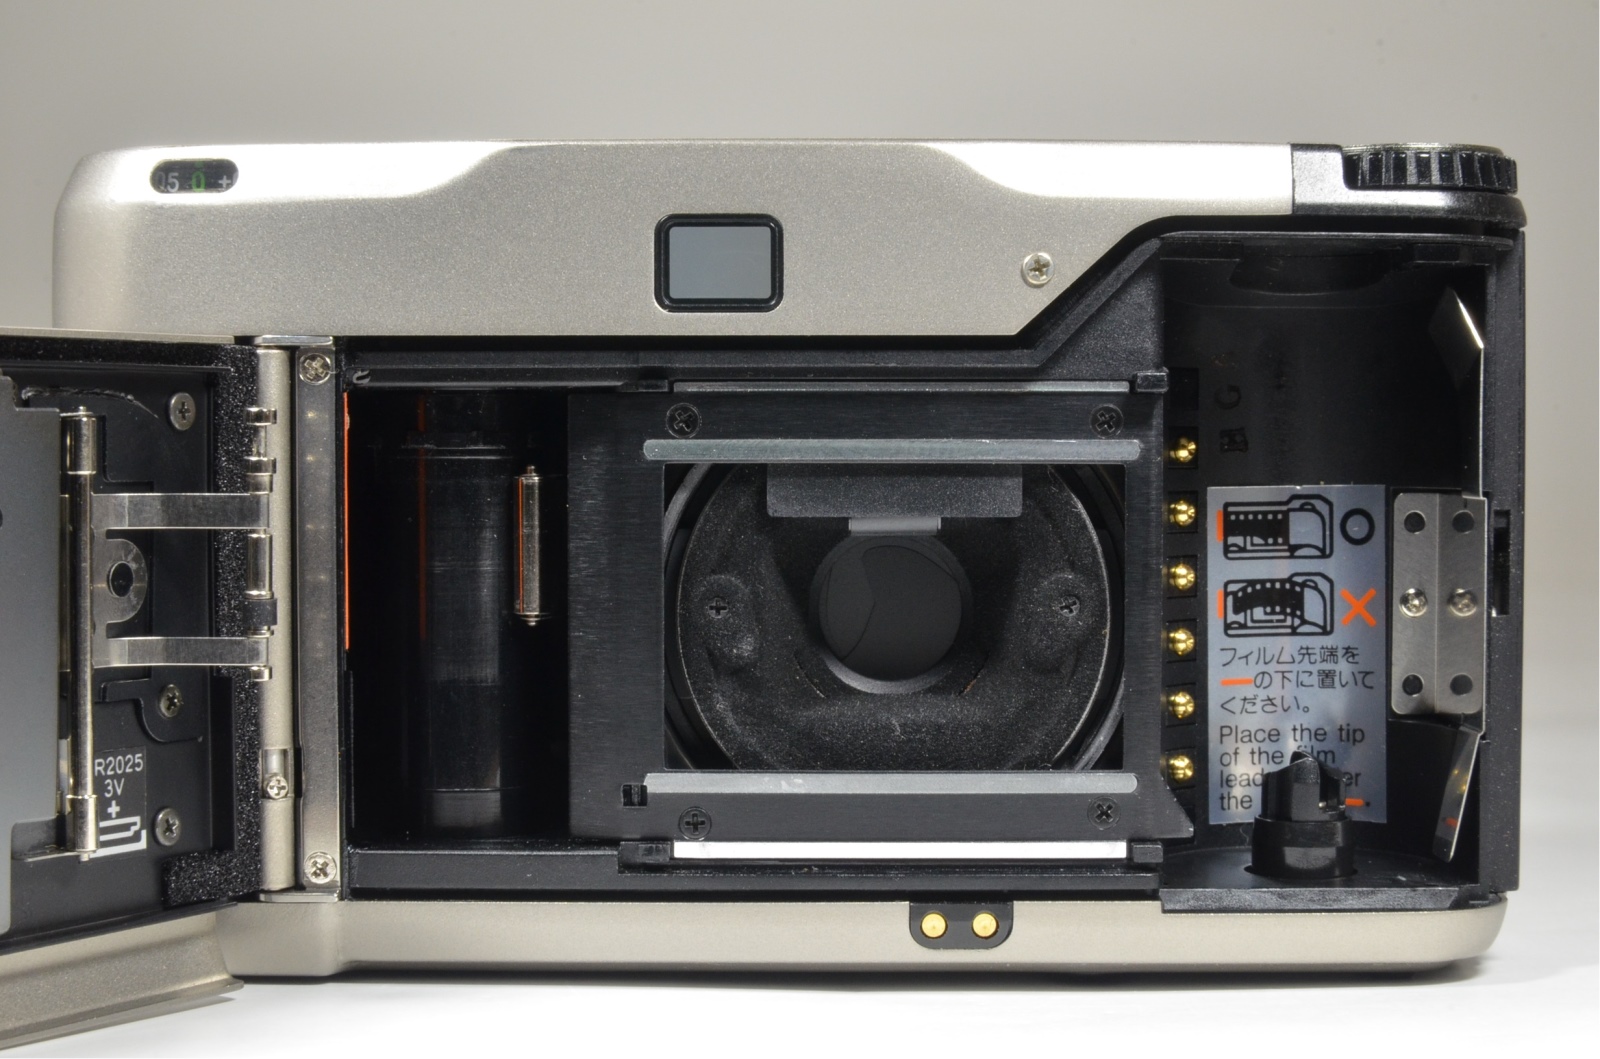 contax t2 titanium silver data back and normal back panel